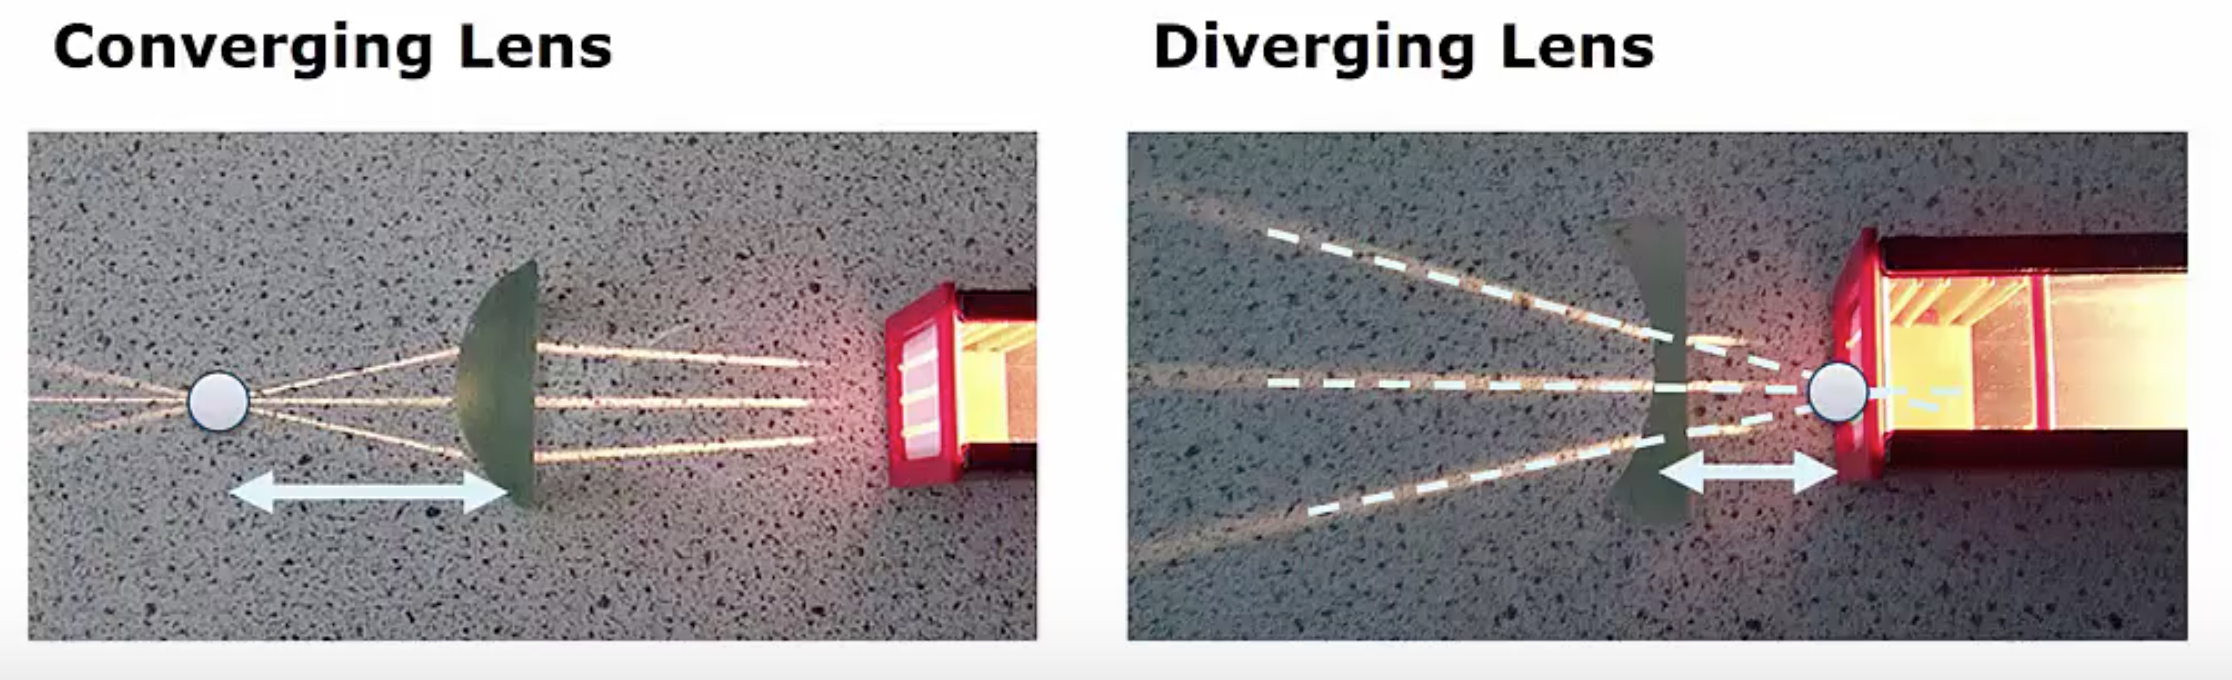 Converging and Diverging lens